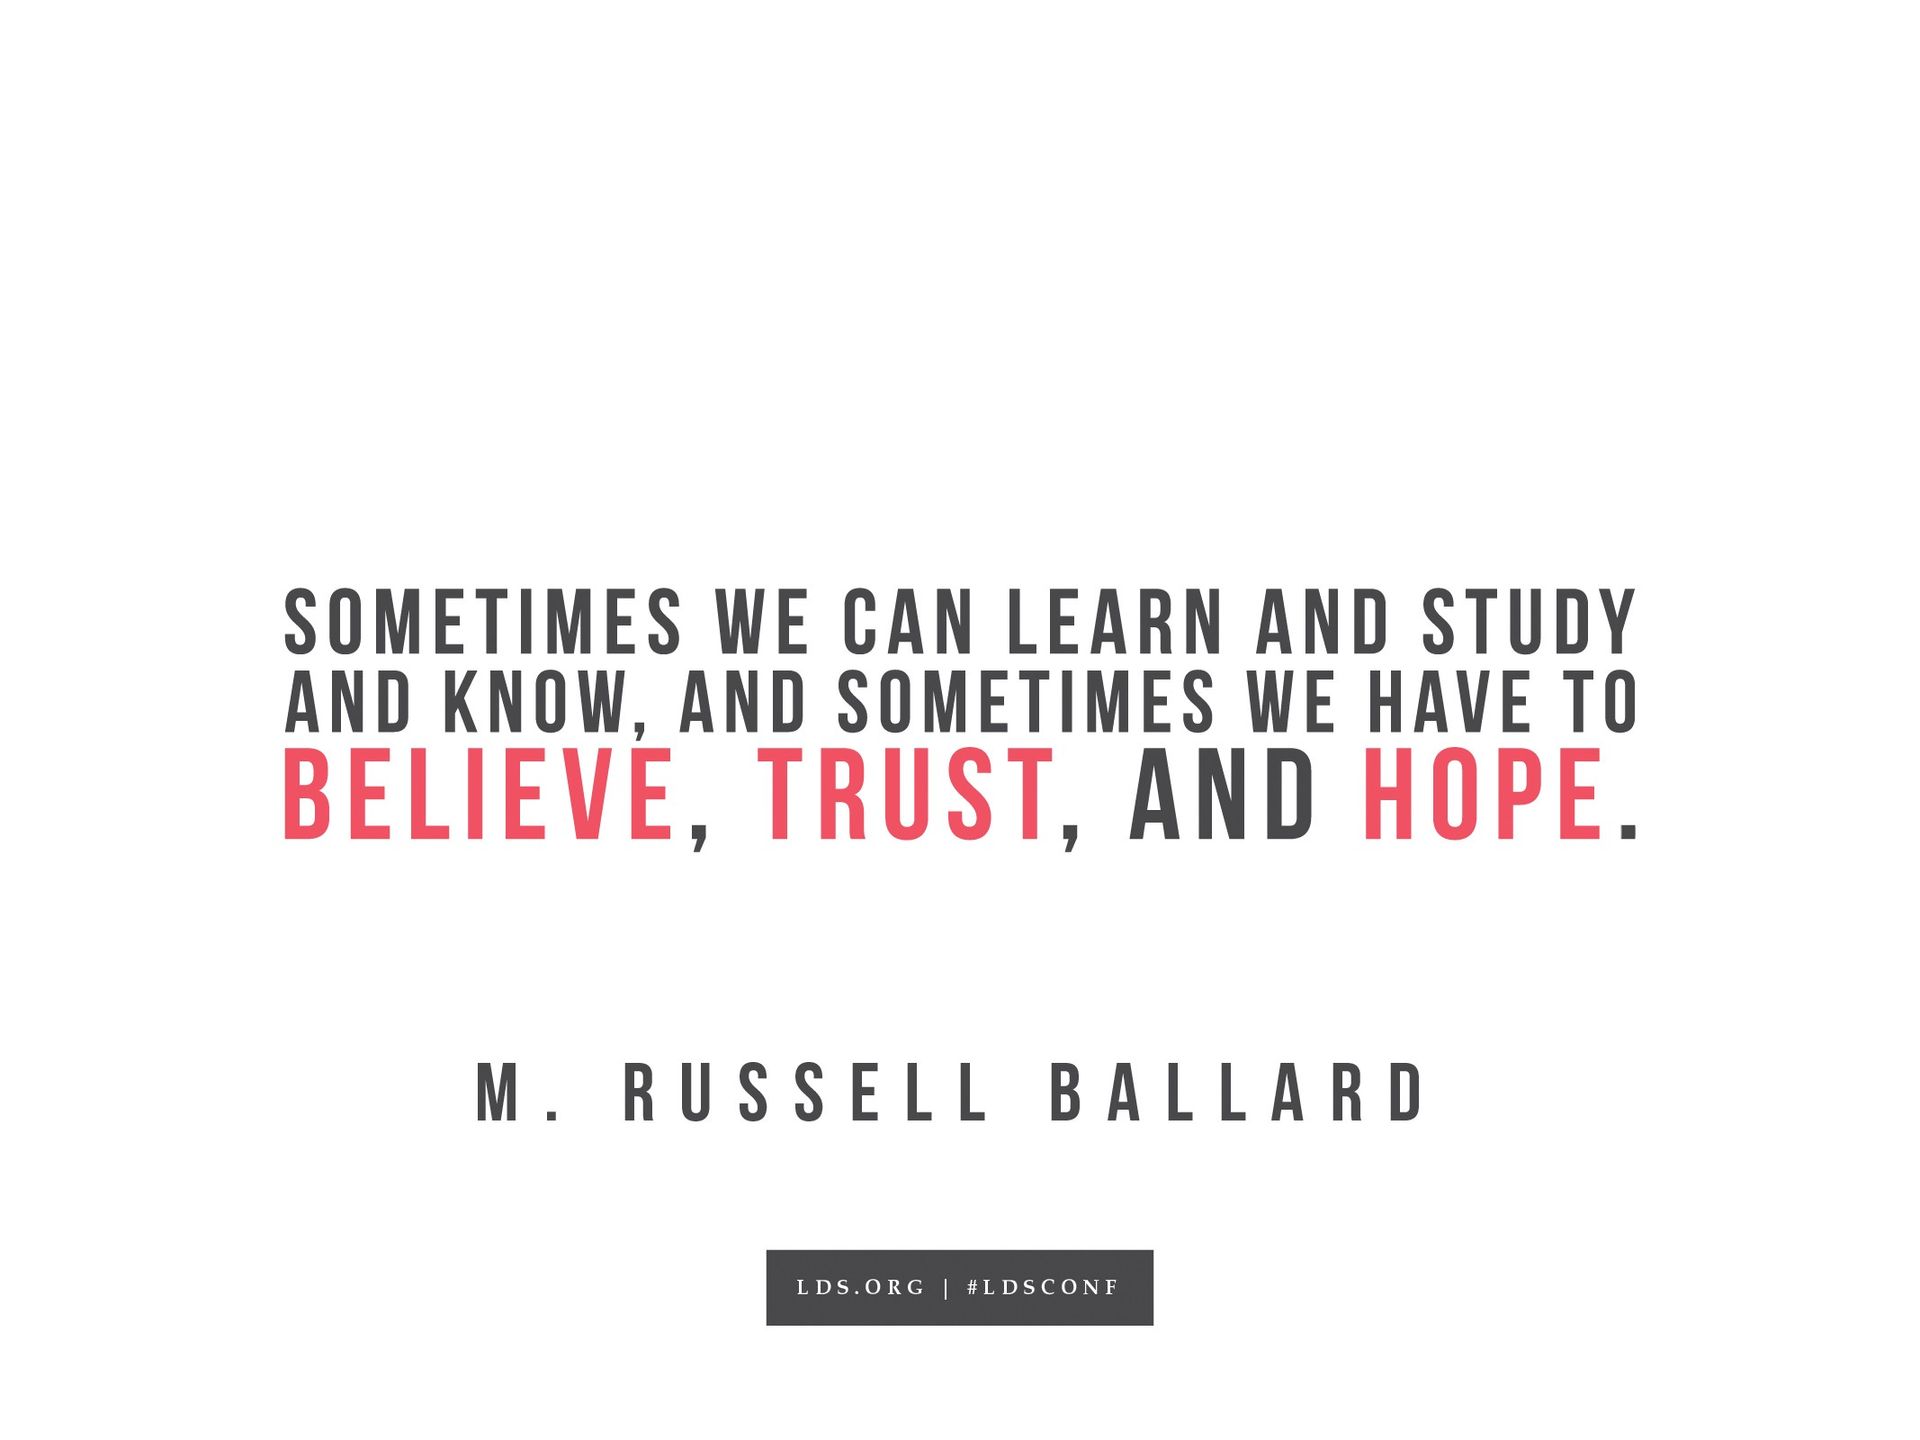 “Sometimes we can learn, study, and know, and sometimes we have to believe, trust, and hope.”—M. Russell Ballard, “To Whom Shall We Go?”